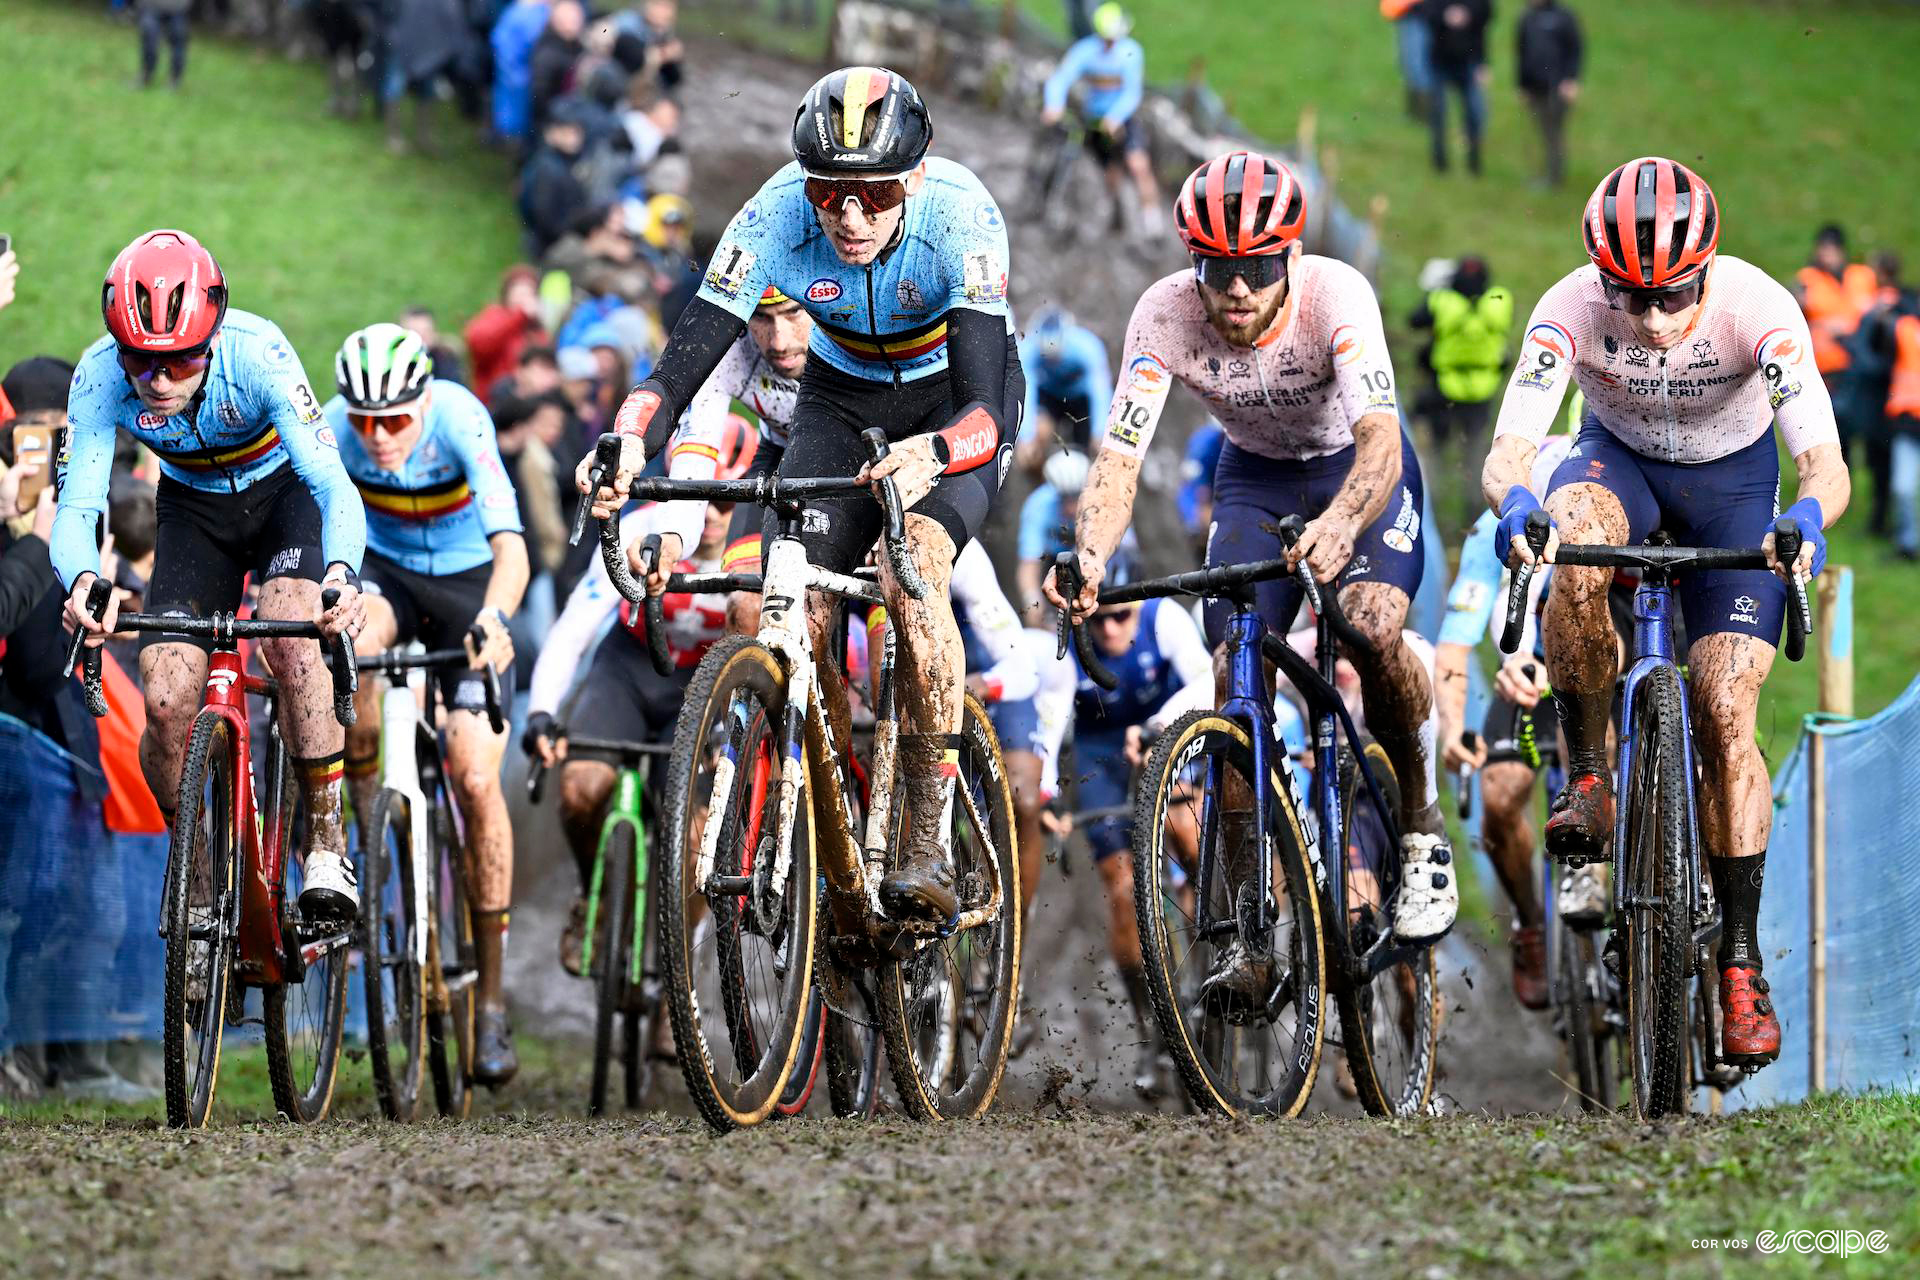 The elite men's bunch rides four abreast through the first turns of the european cyclocross champs course.